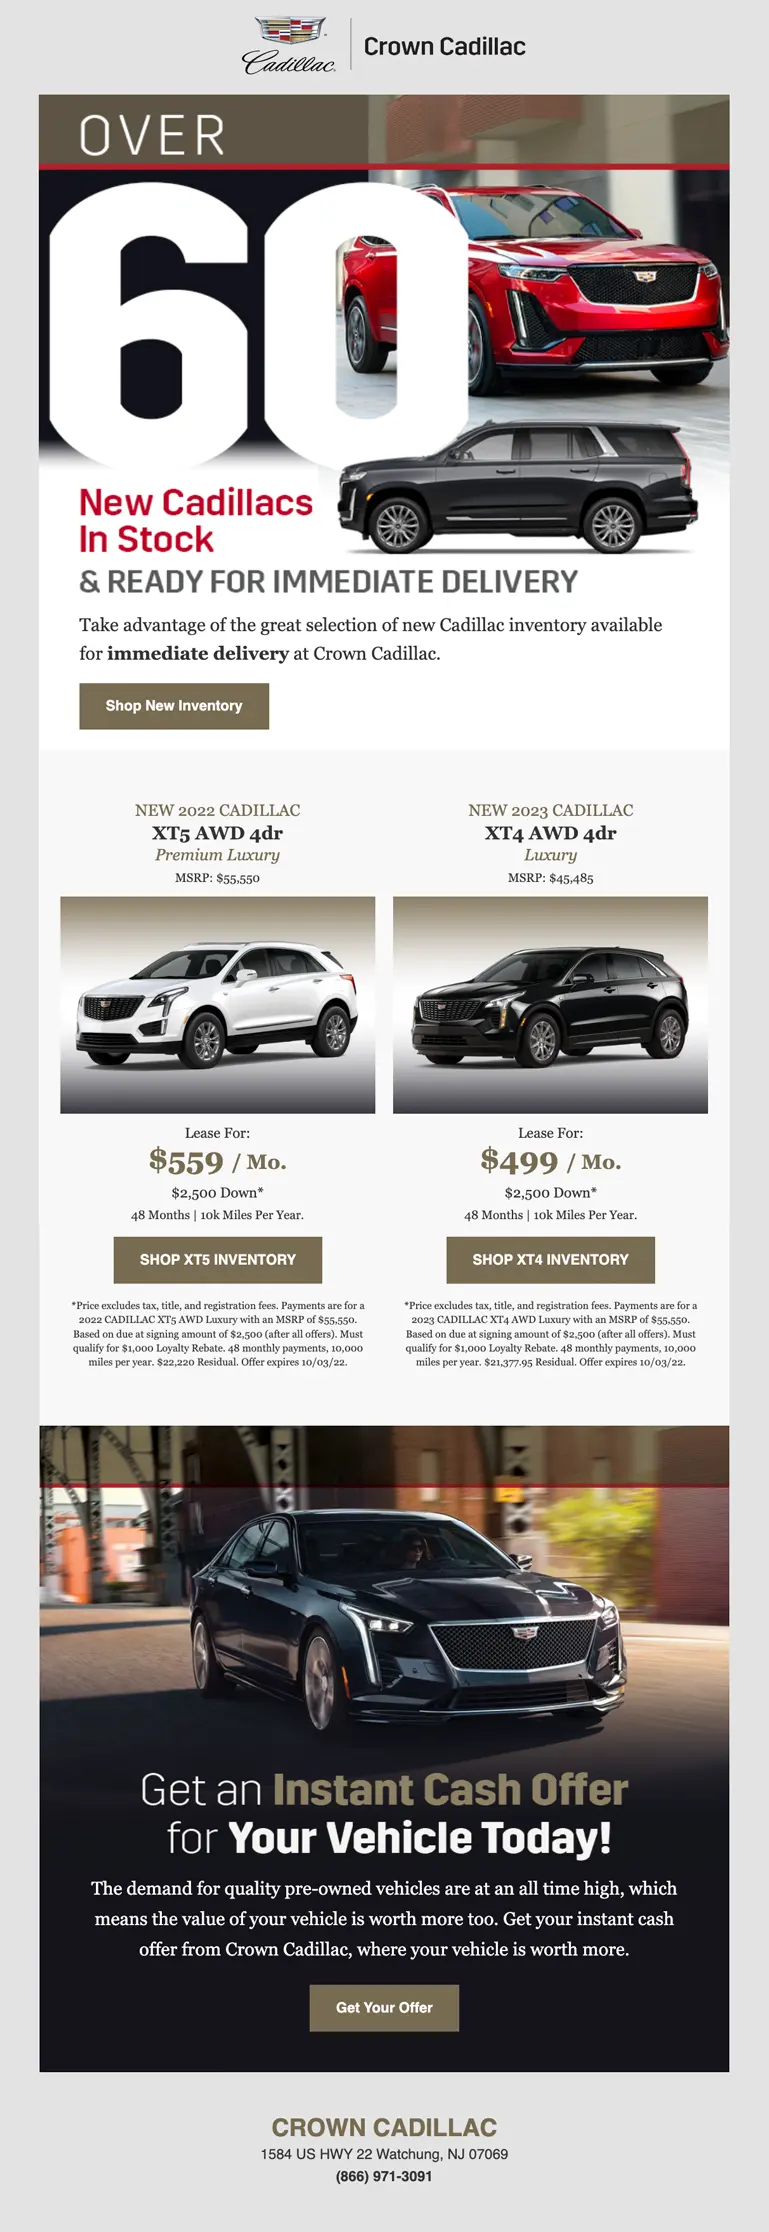 Crown Cadillac Incentive Email Marketing